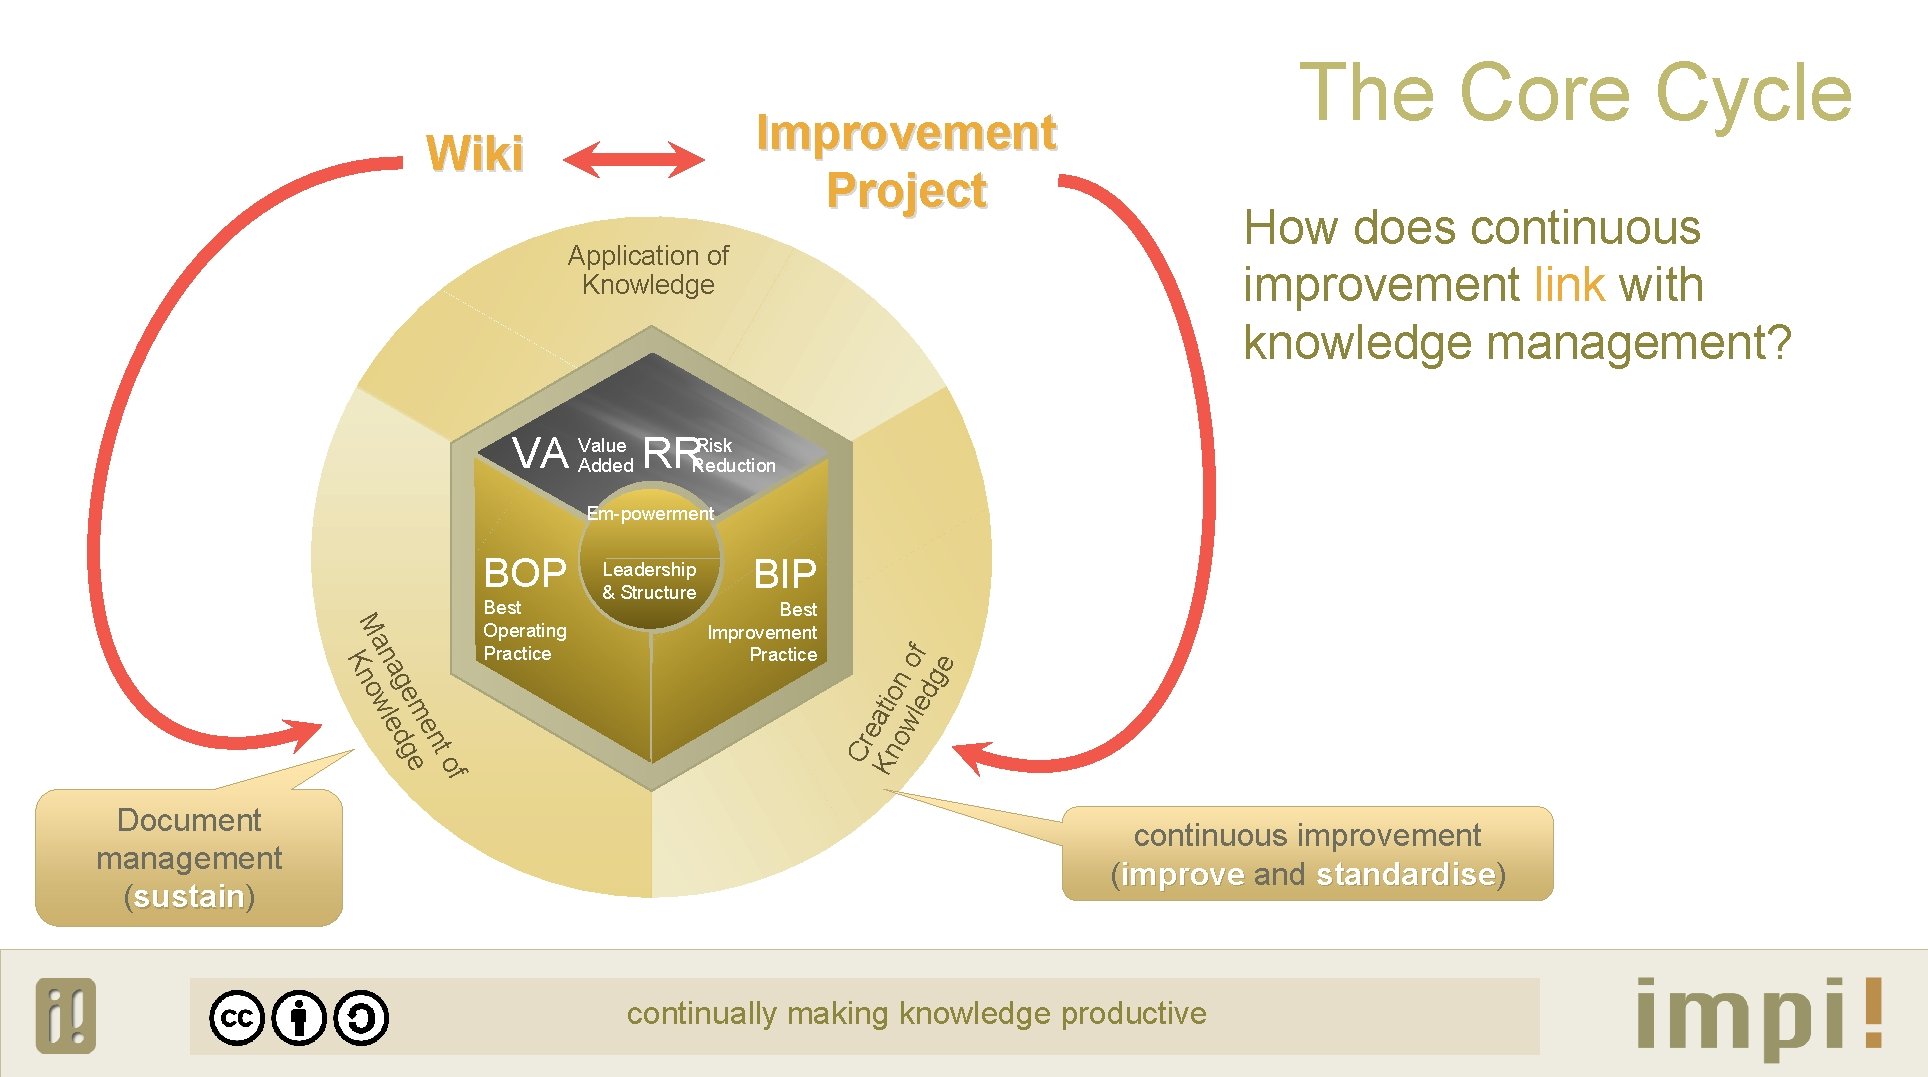 The Core Cycle Improvement Project Wiki How does continuous improvement link with knowledge management?